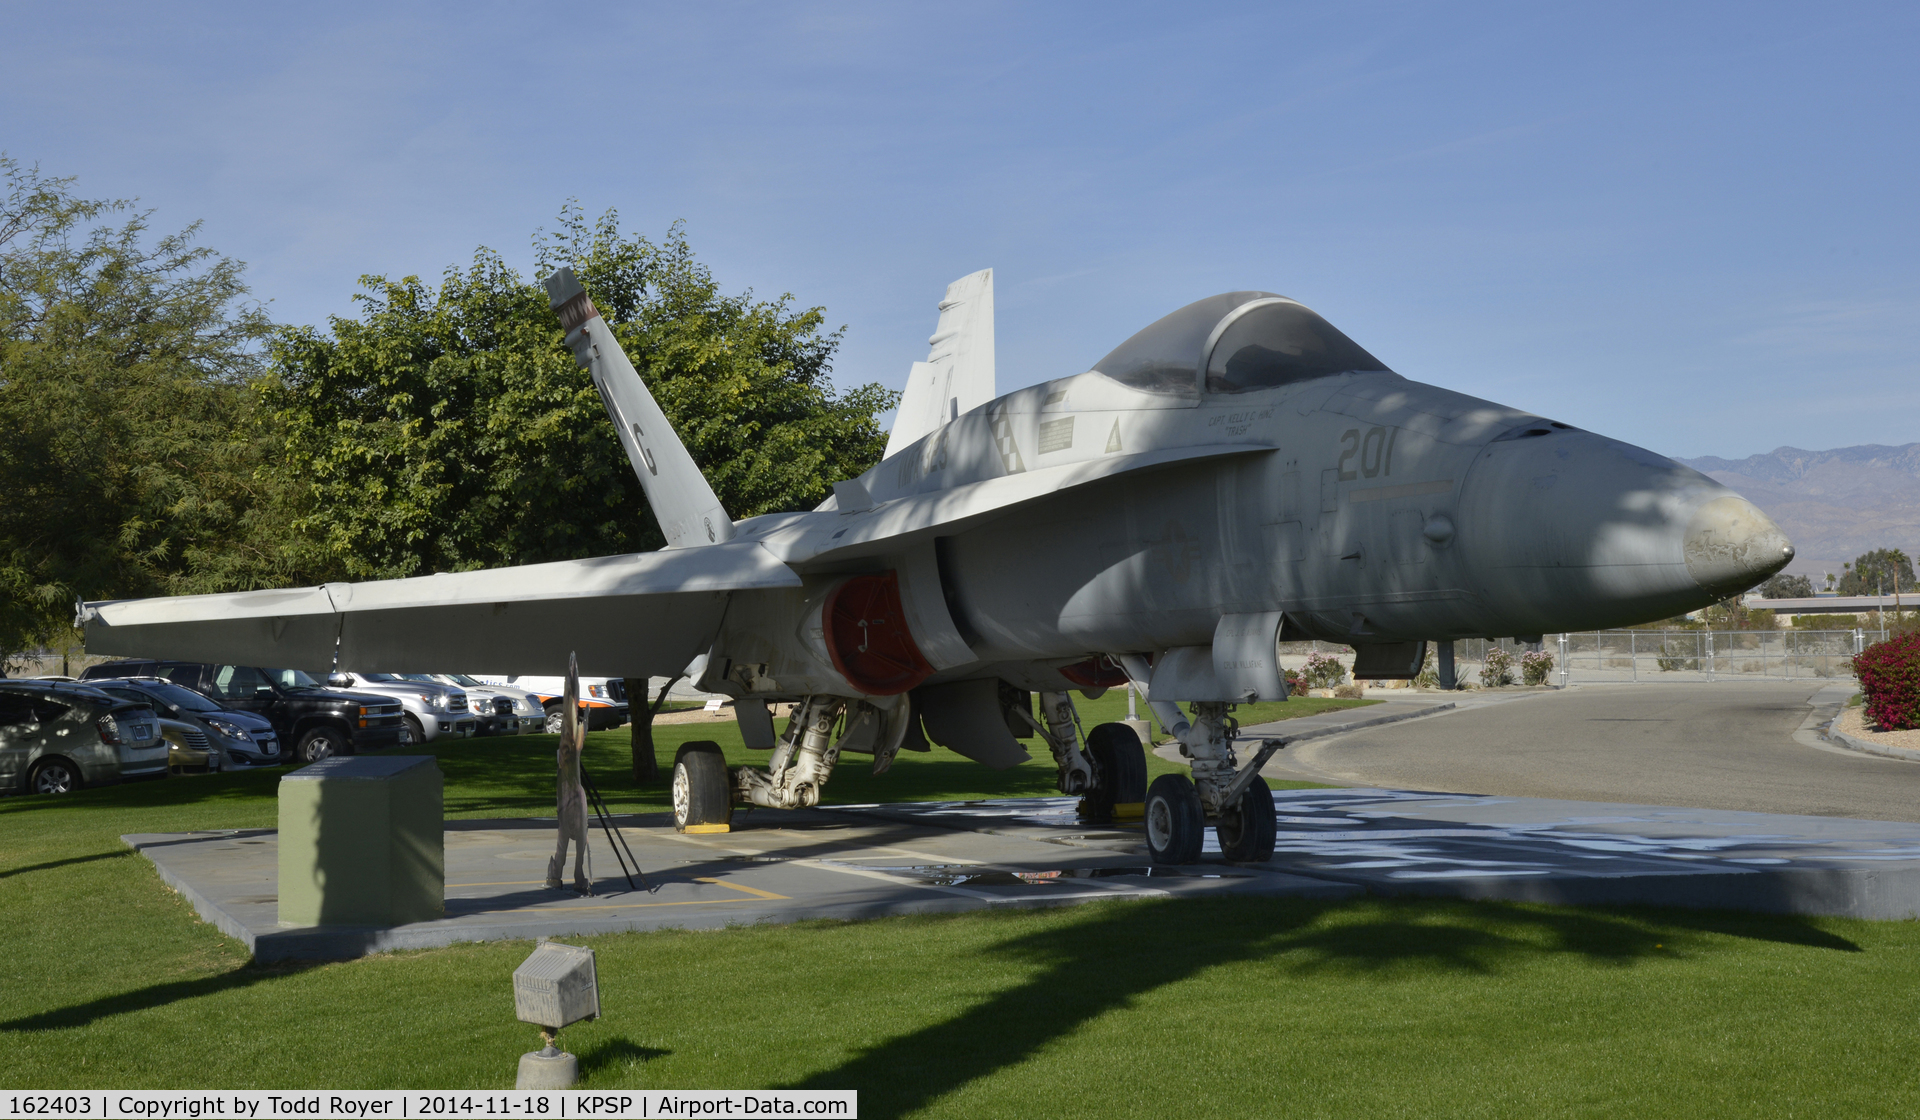 162403, McDonnell Douglas F/A-18A Hornet C/N 0231/A183, On display at the Palm Springs Air Museum